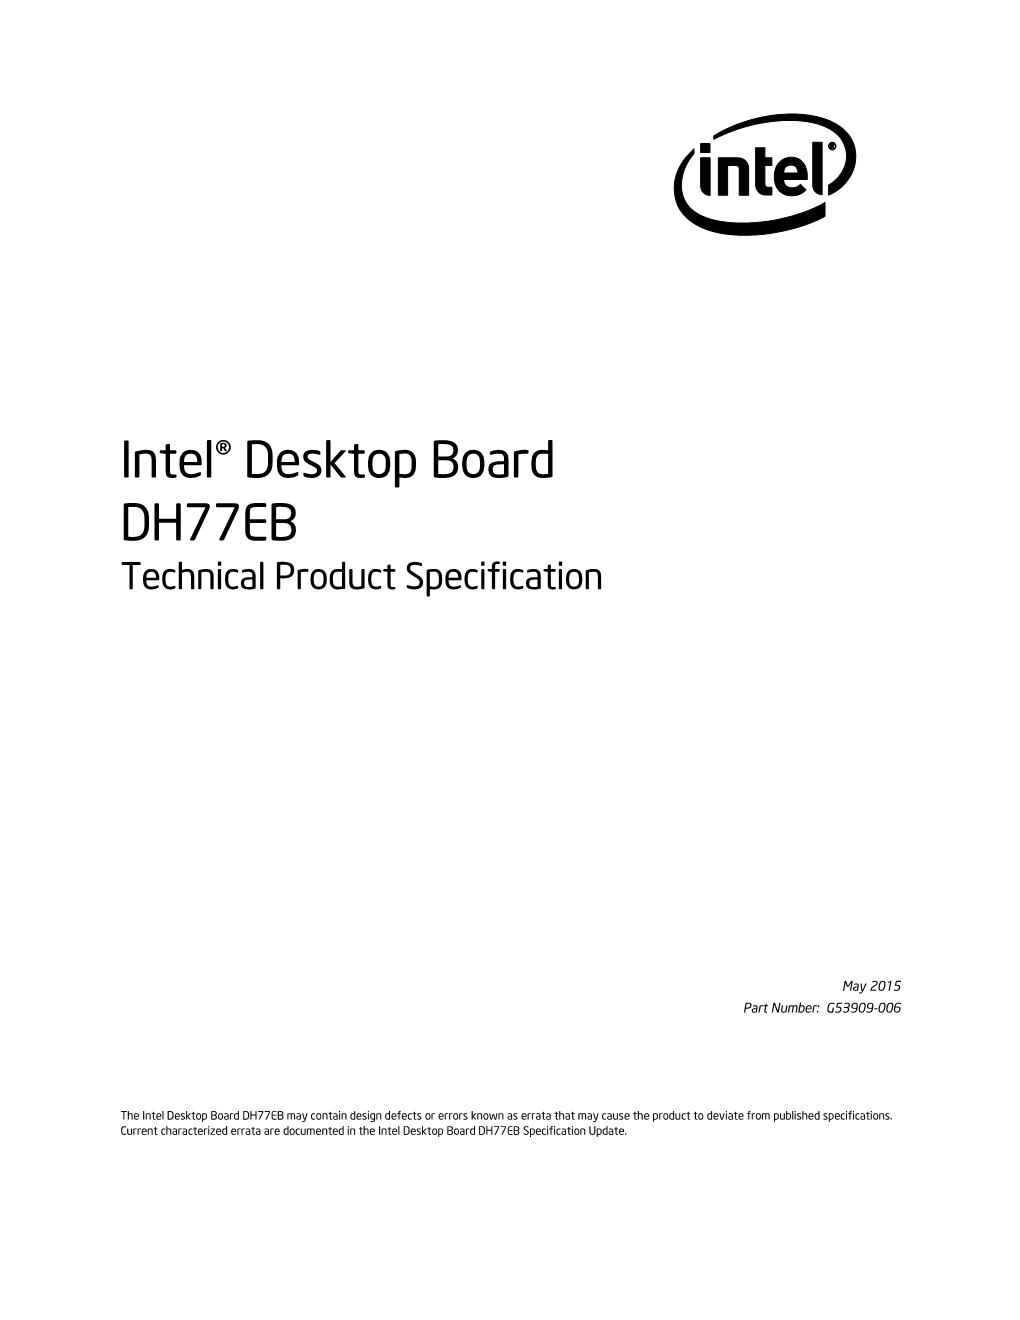 Intel® Desktop Board DH77EB Technical Product Specification